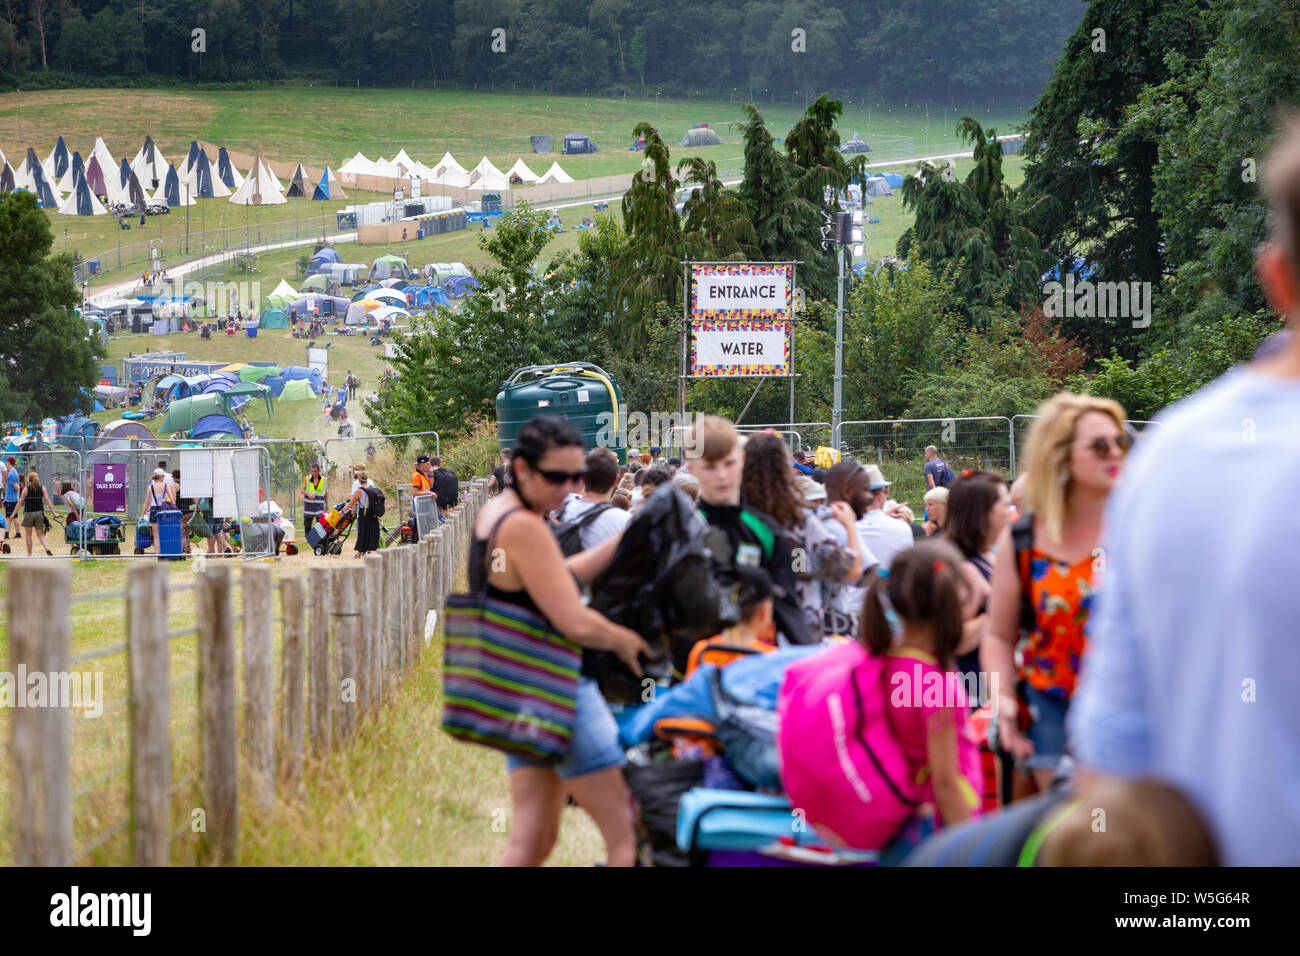 People arriving and queuing on the first day of Camp Bestival, Lulworth Castle grounds, Dorset, UK Stock Photo